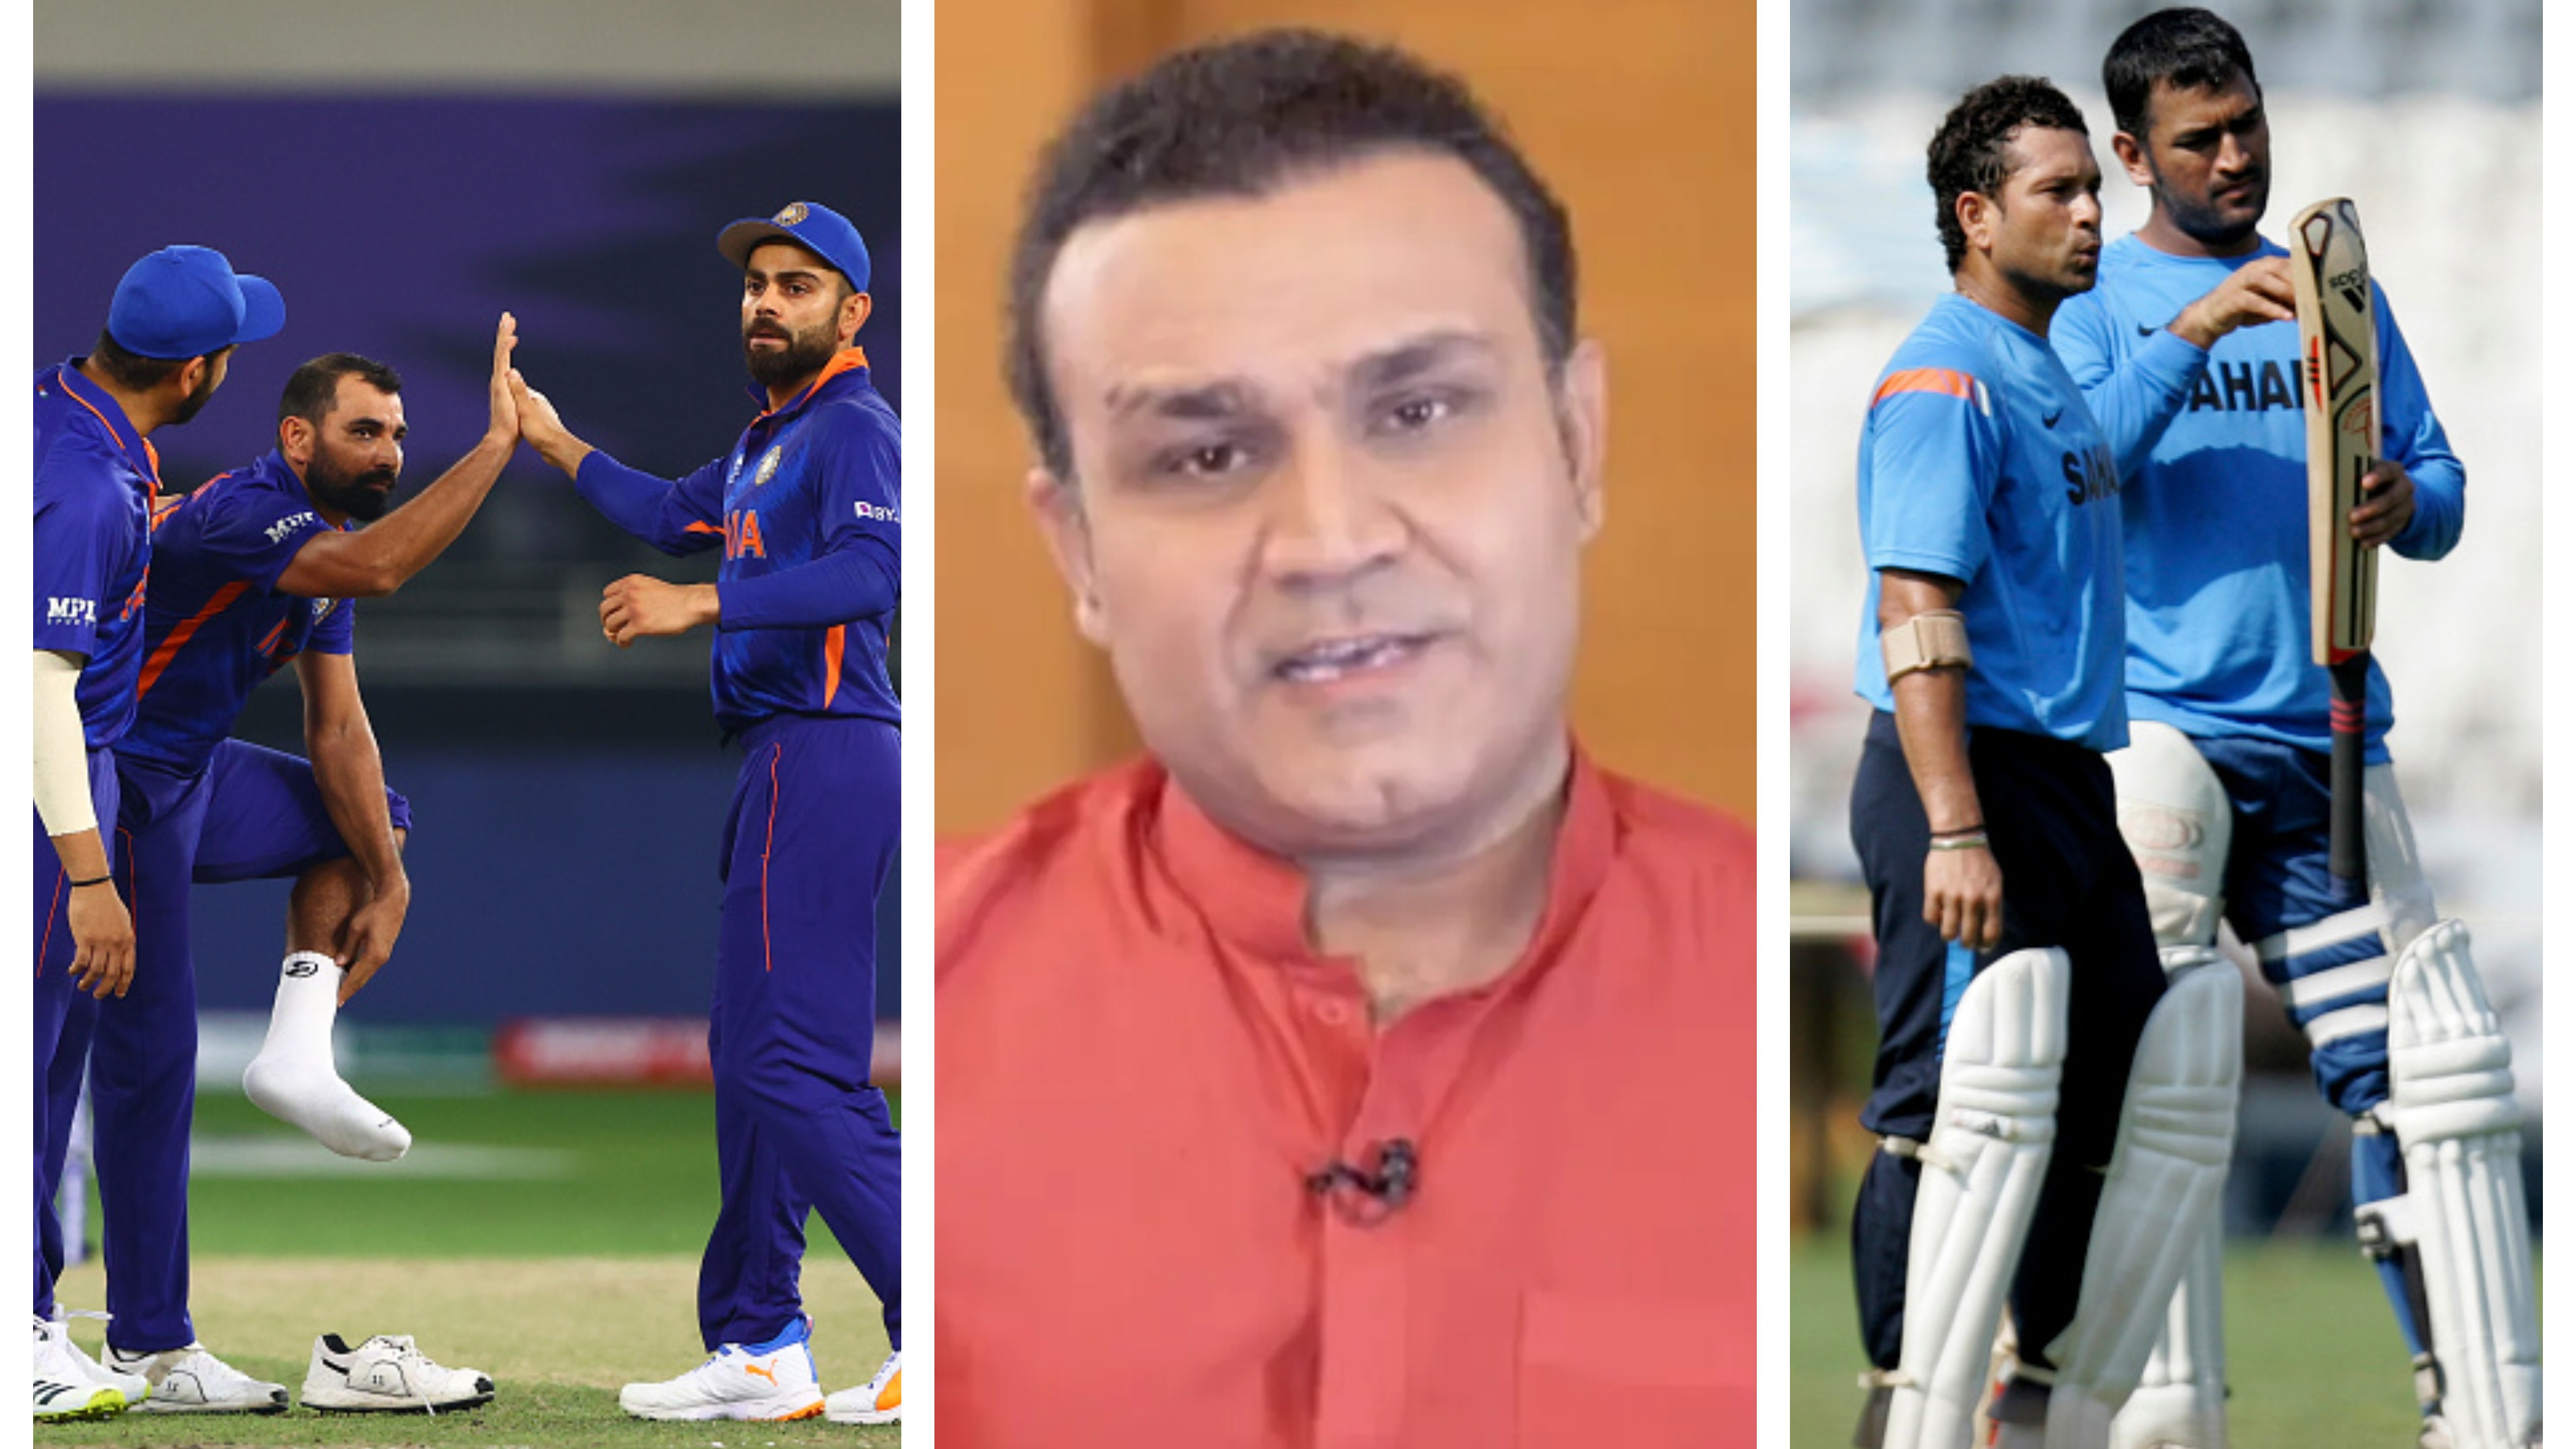 Sehwag expects Kohli to play the same role Tendulkar donned after relinquishing captaincy